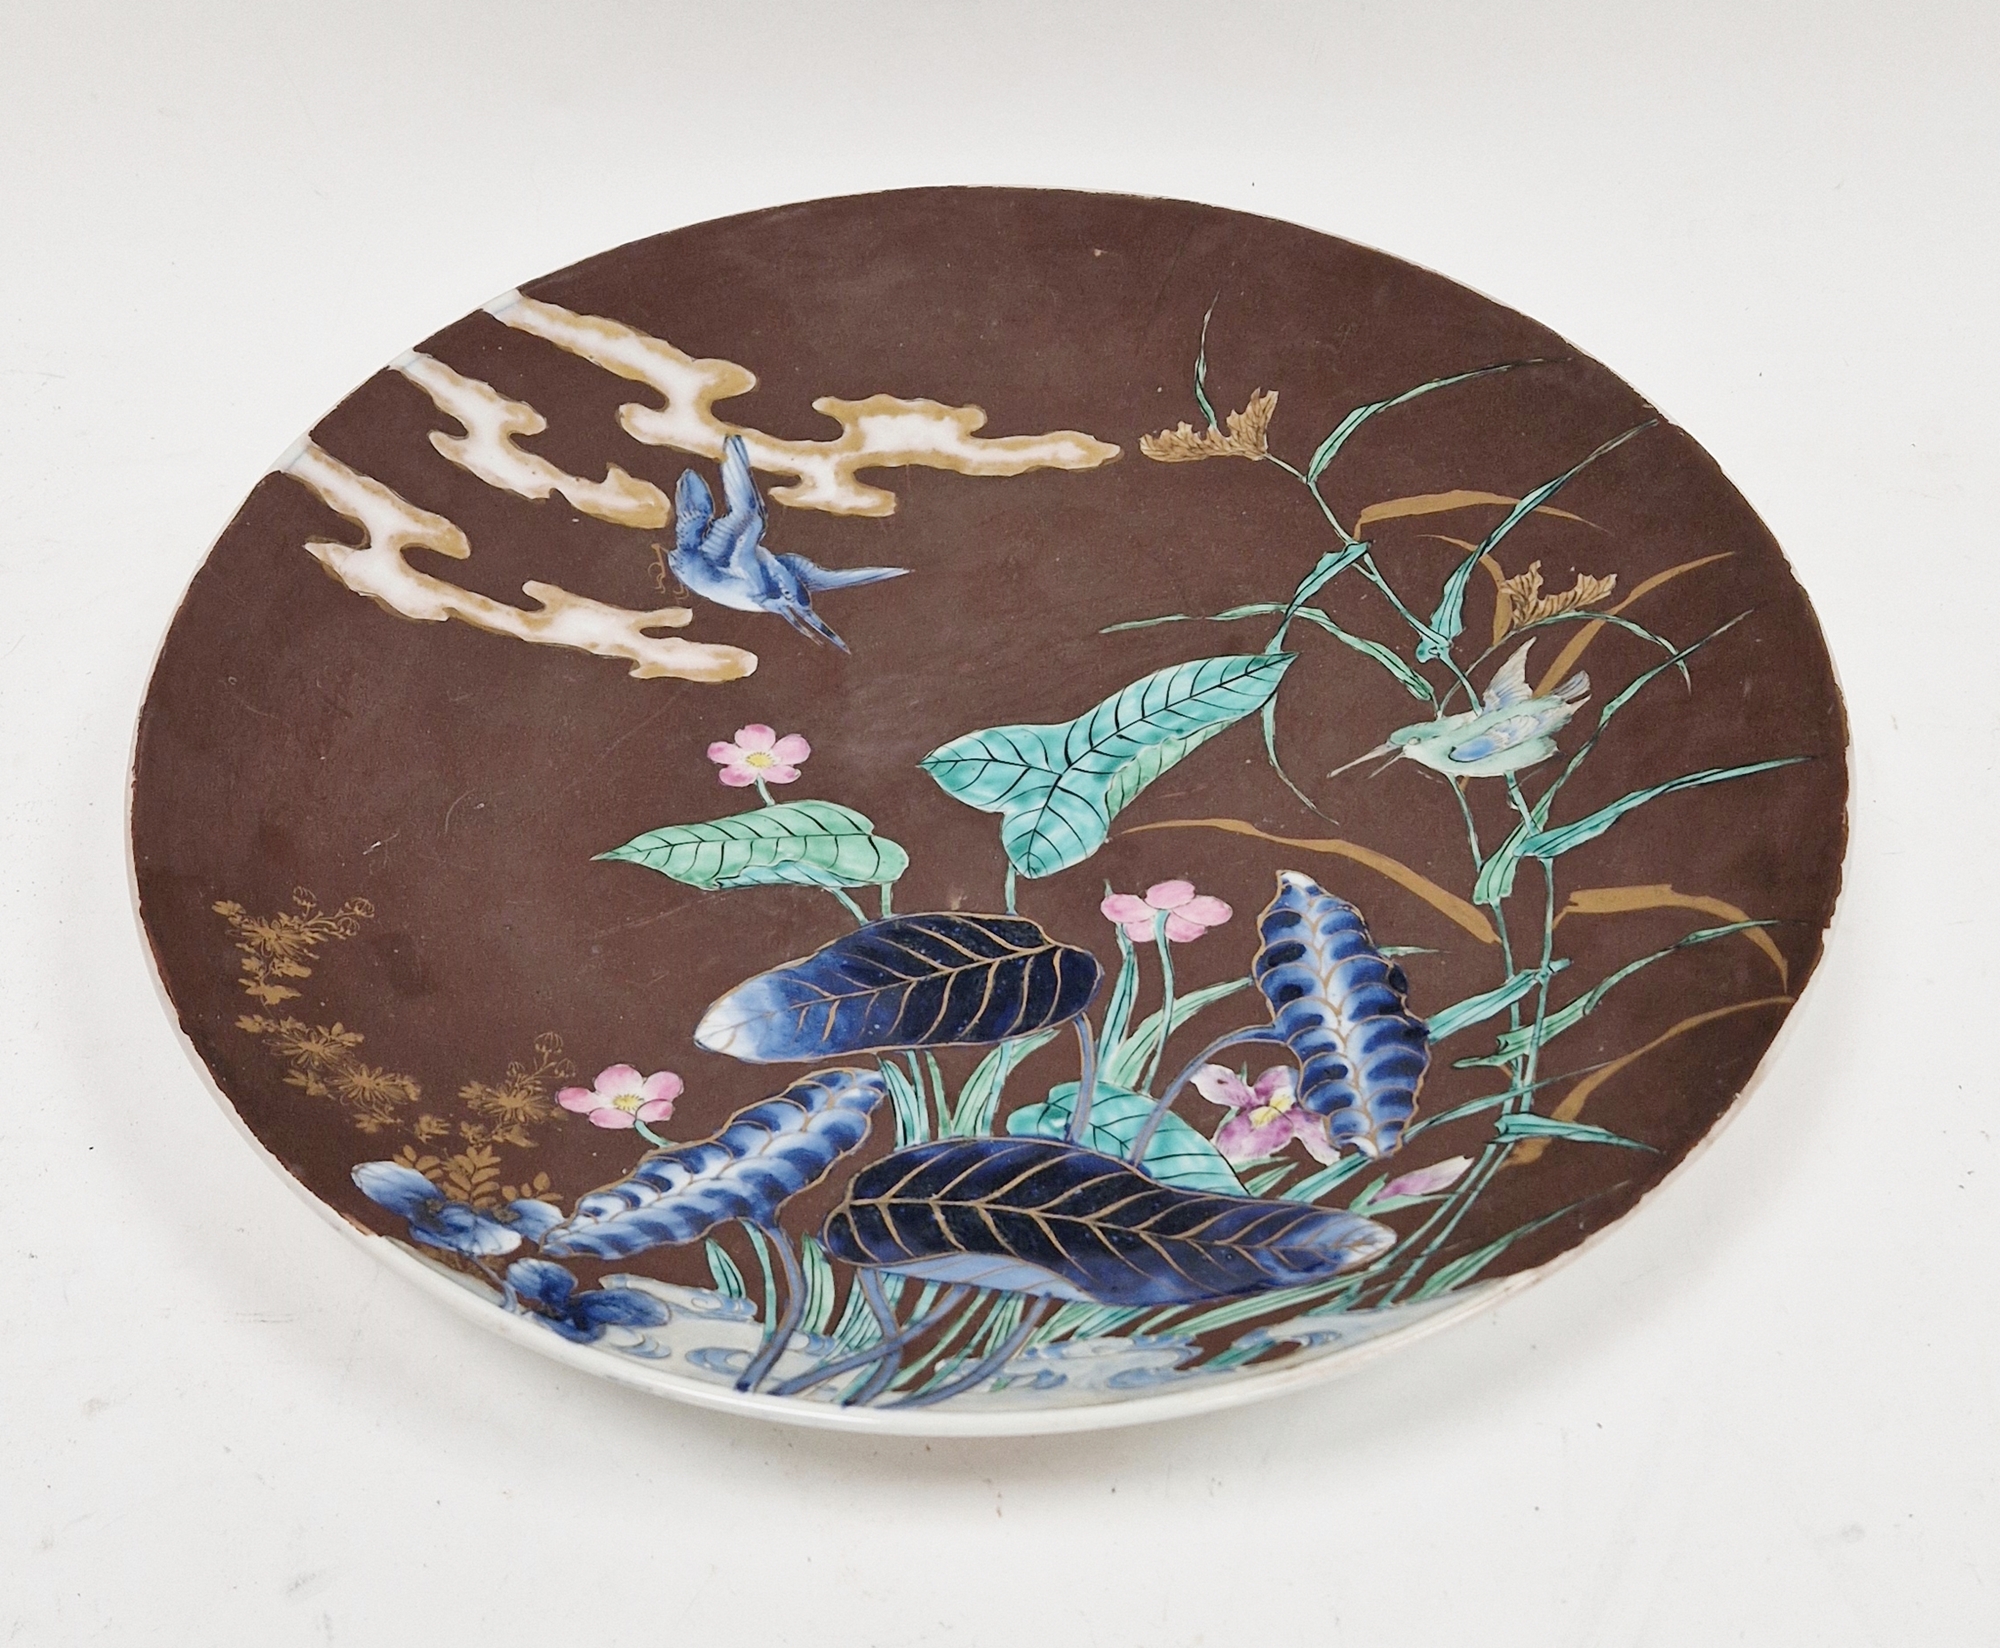 Early 20th century Japanese porcelain charger, painted in underglaze blue with water plants and